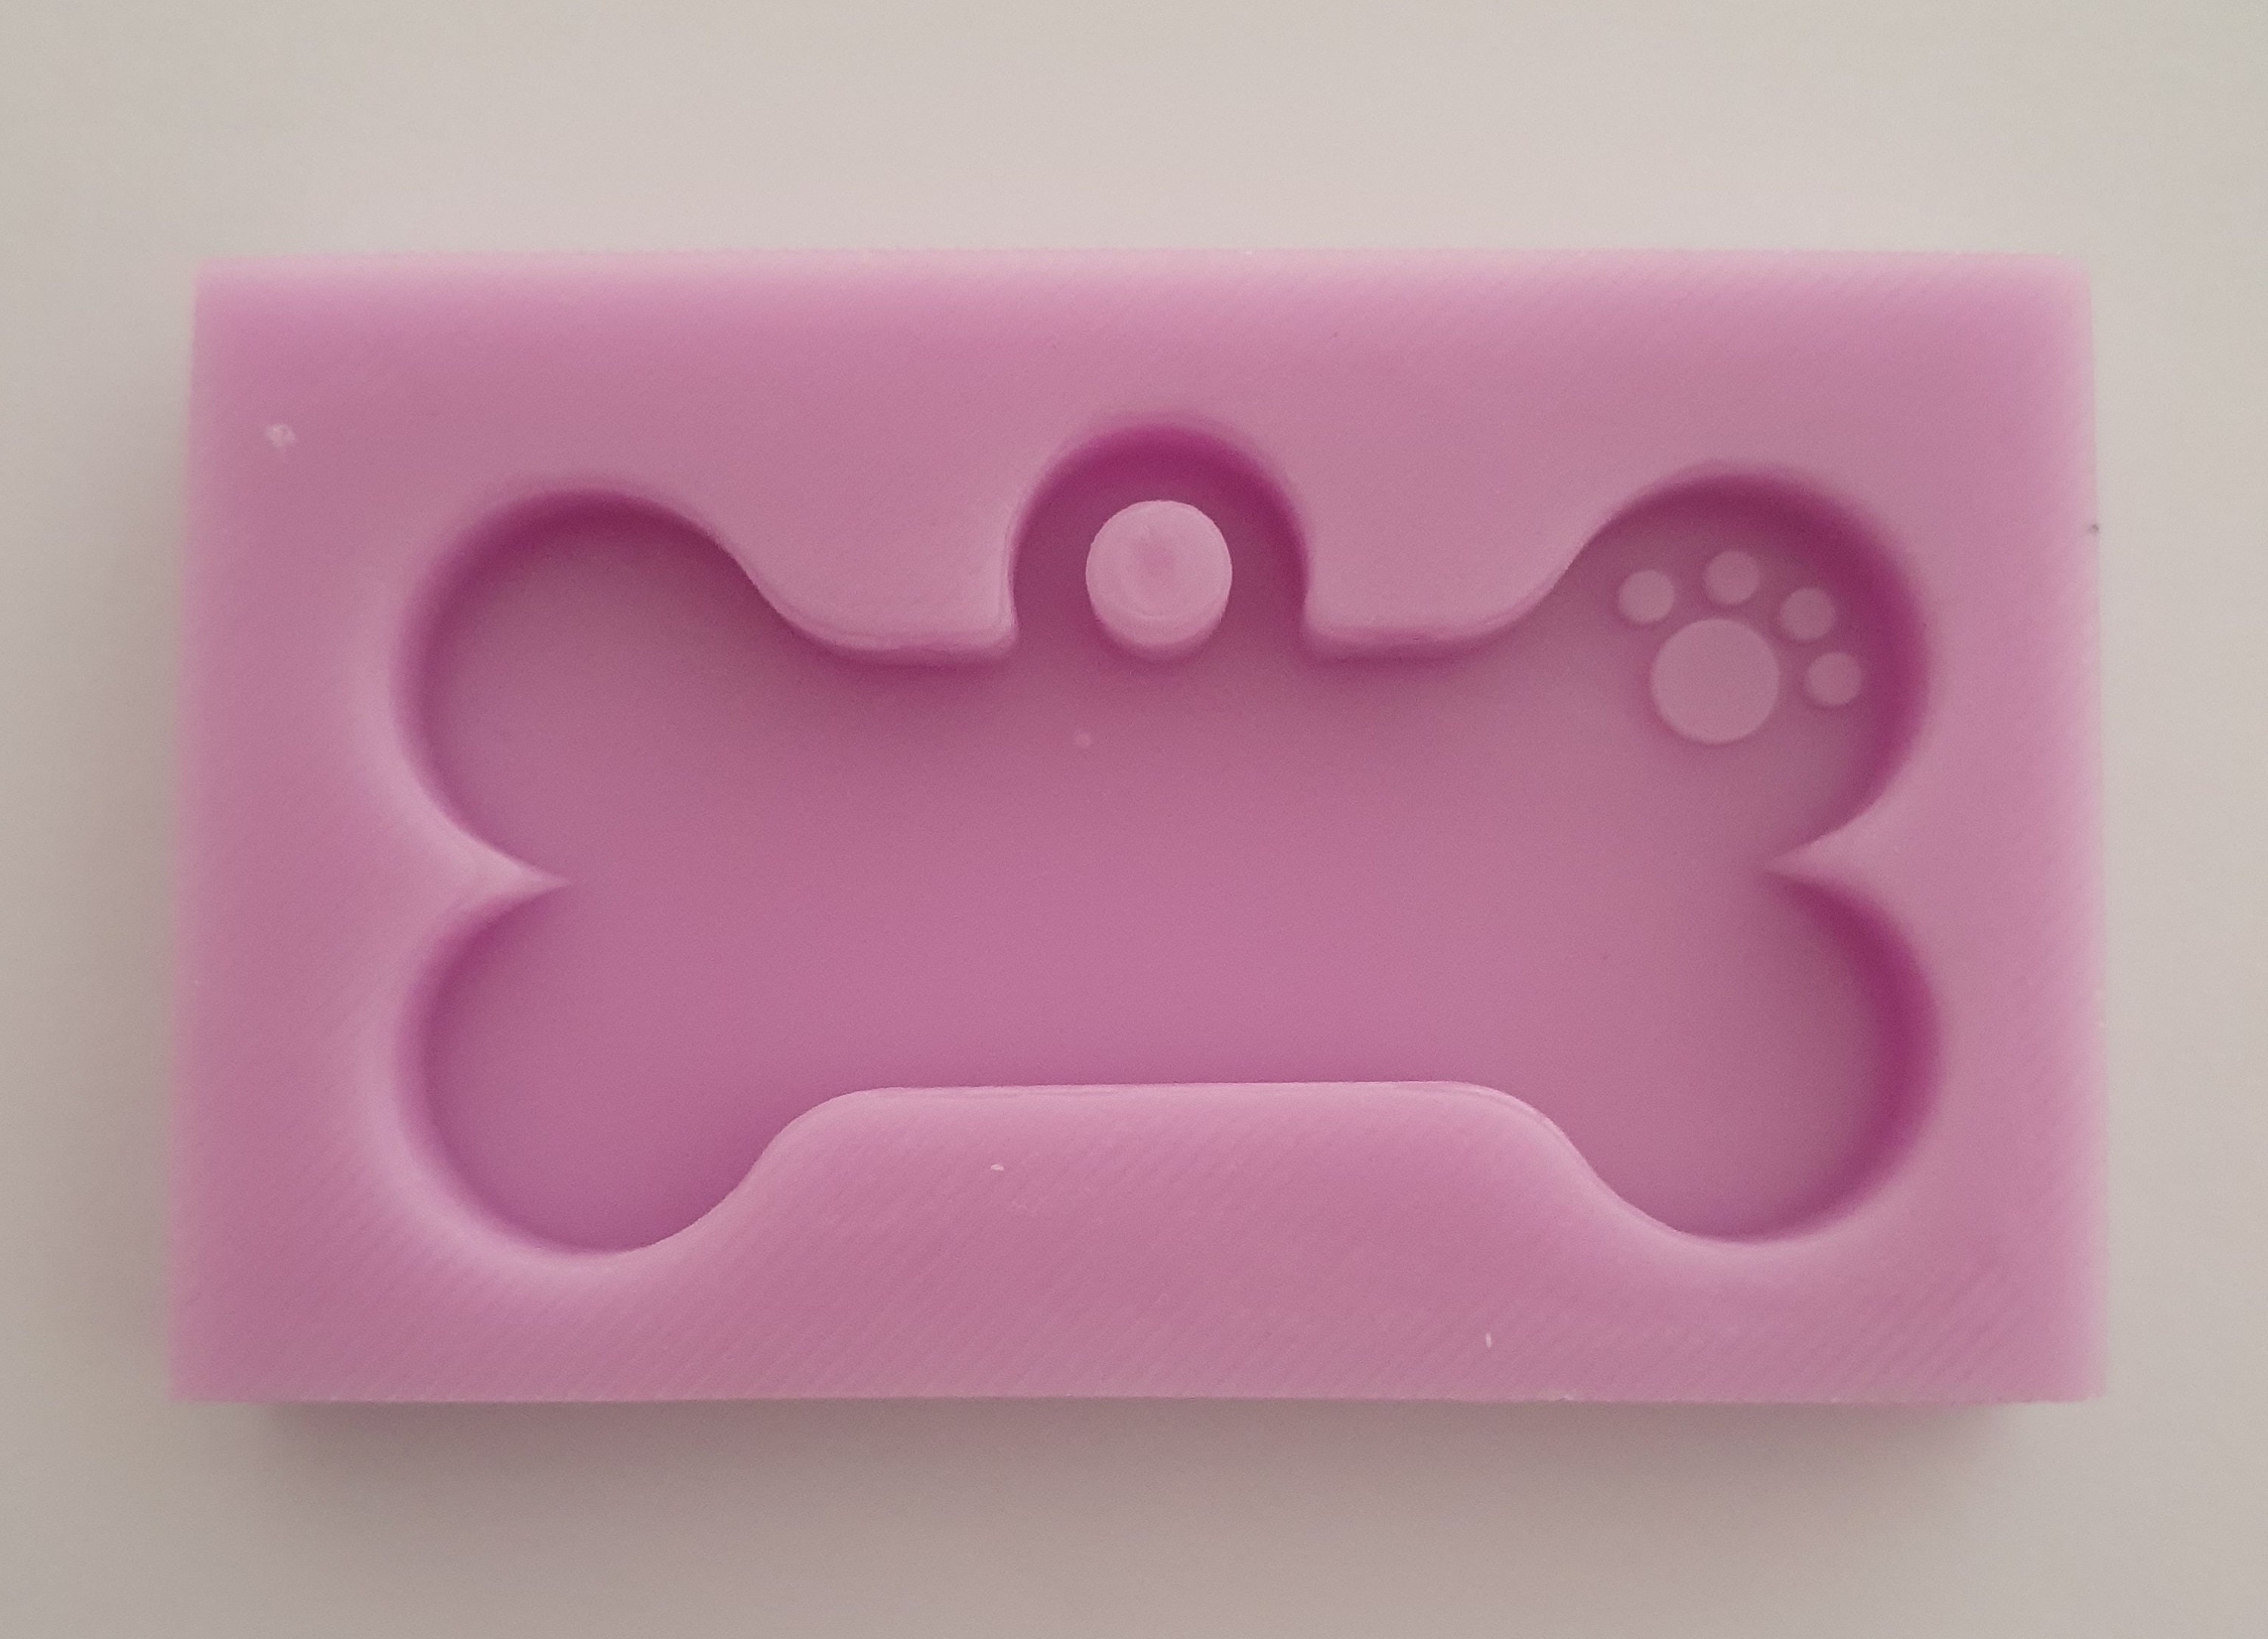 Dog Carrier Tag Resin Mold Silicone Pendent Making Reusable Unique Shape  Casting Molds For Birthday Gift And From Kuguacaig, $6.8